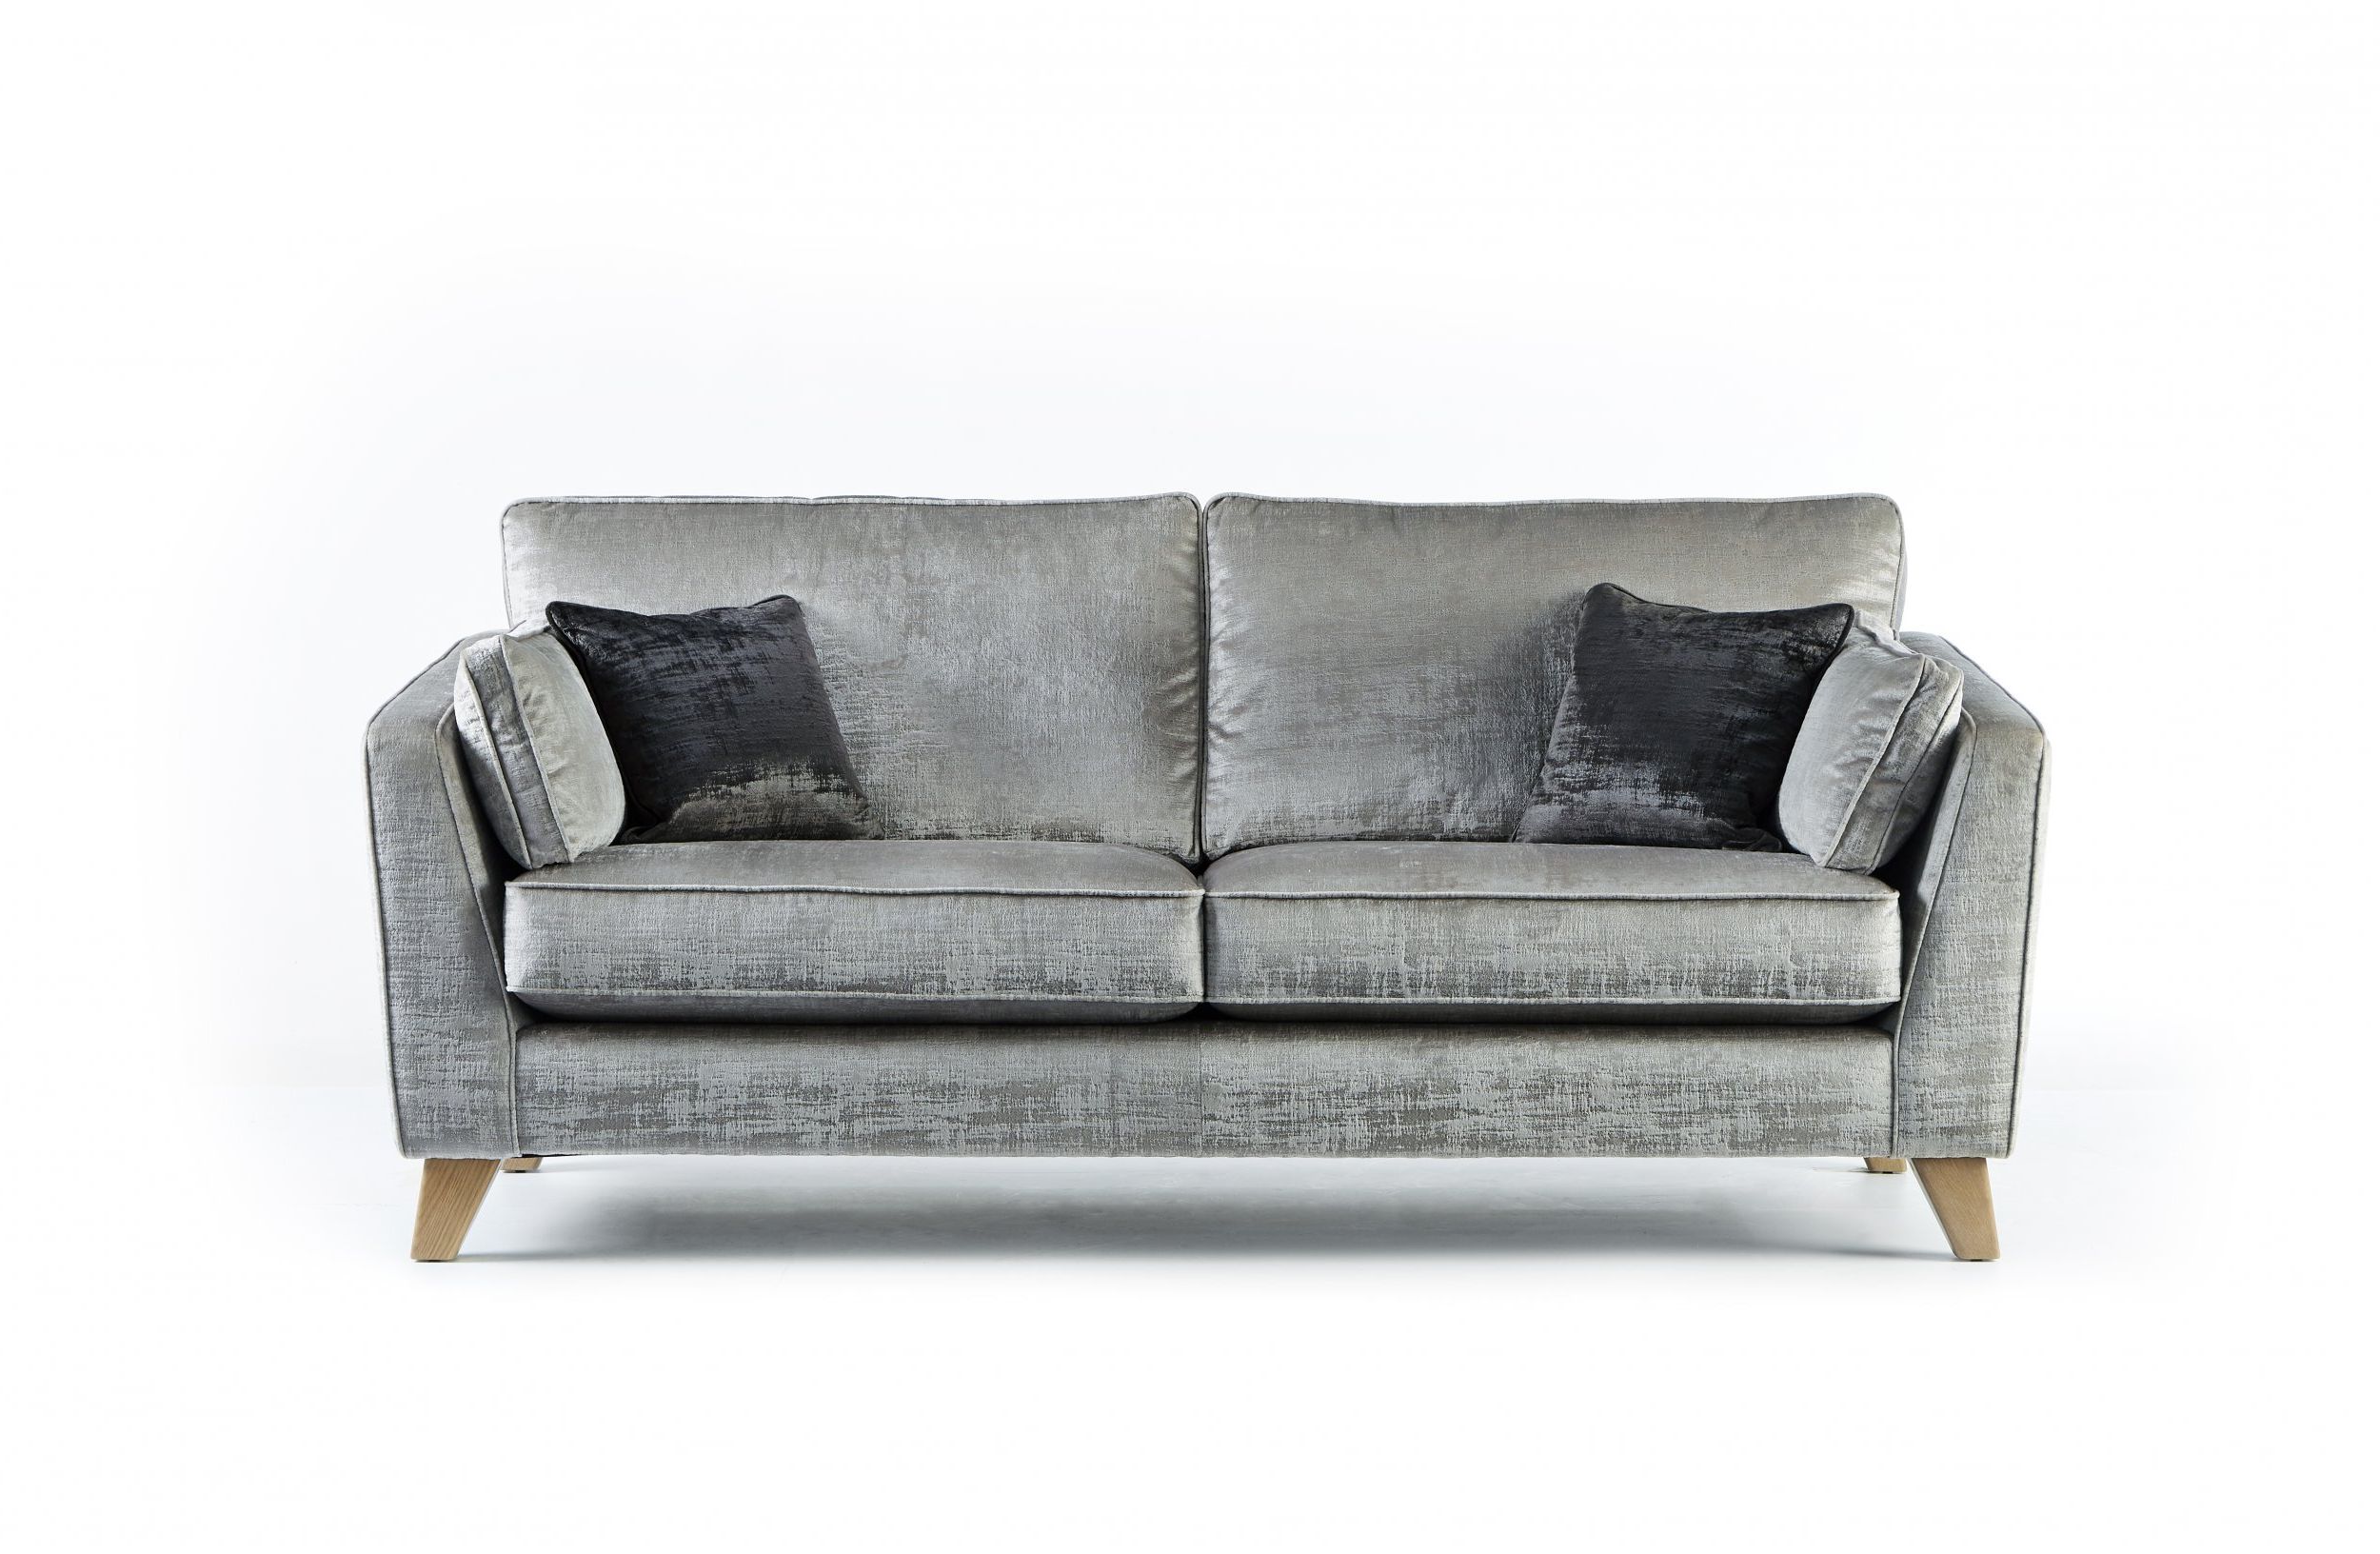 Eyres Furniture Throughout 2018 Hamptons Sofas (View 6 of 20)